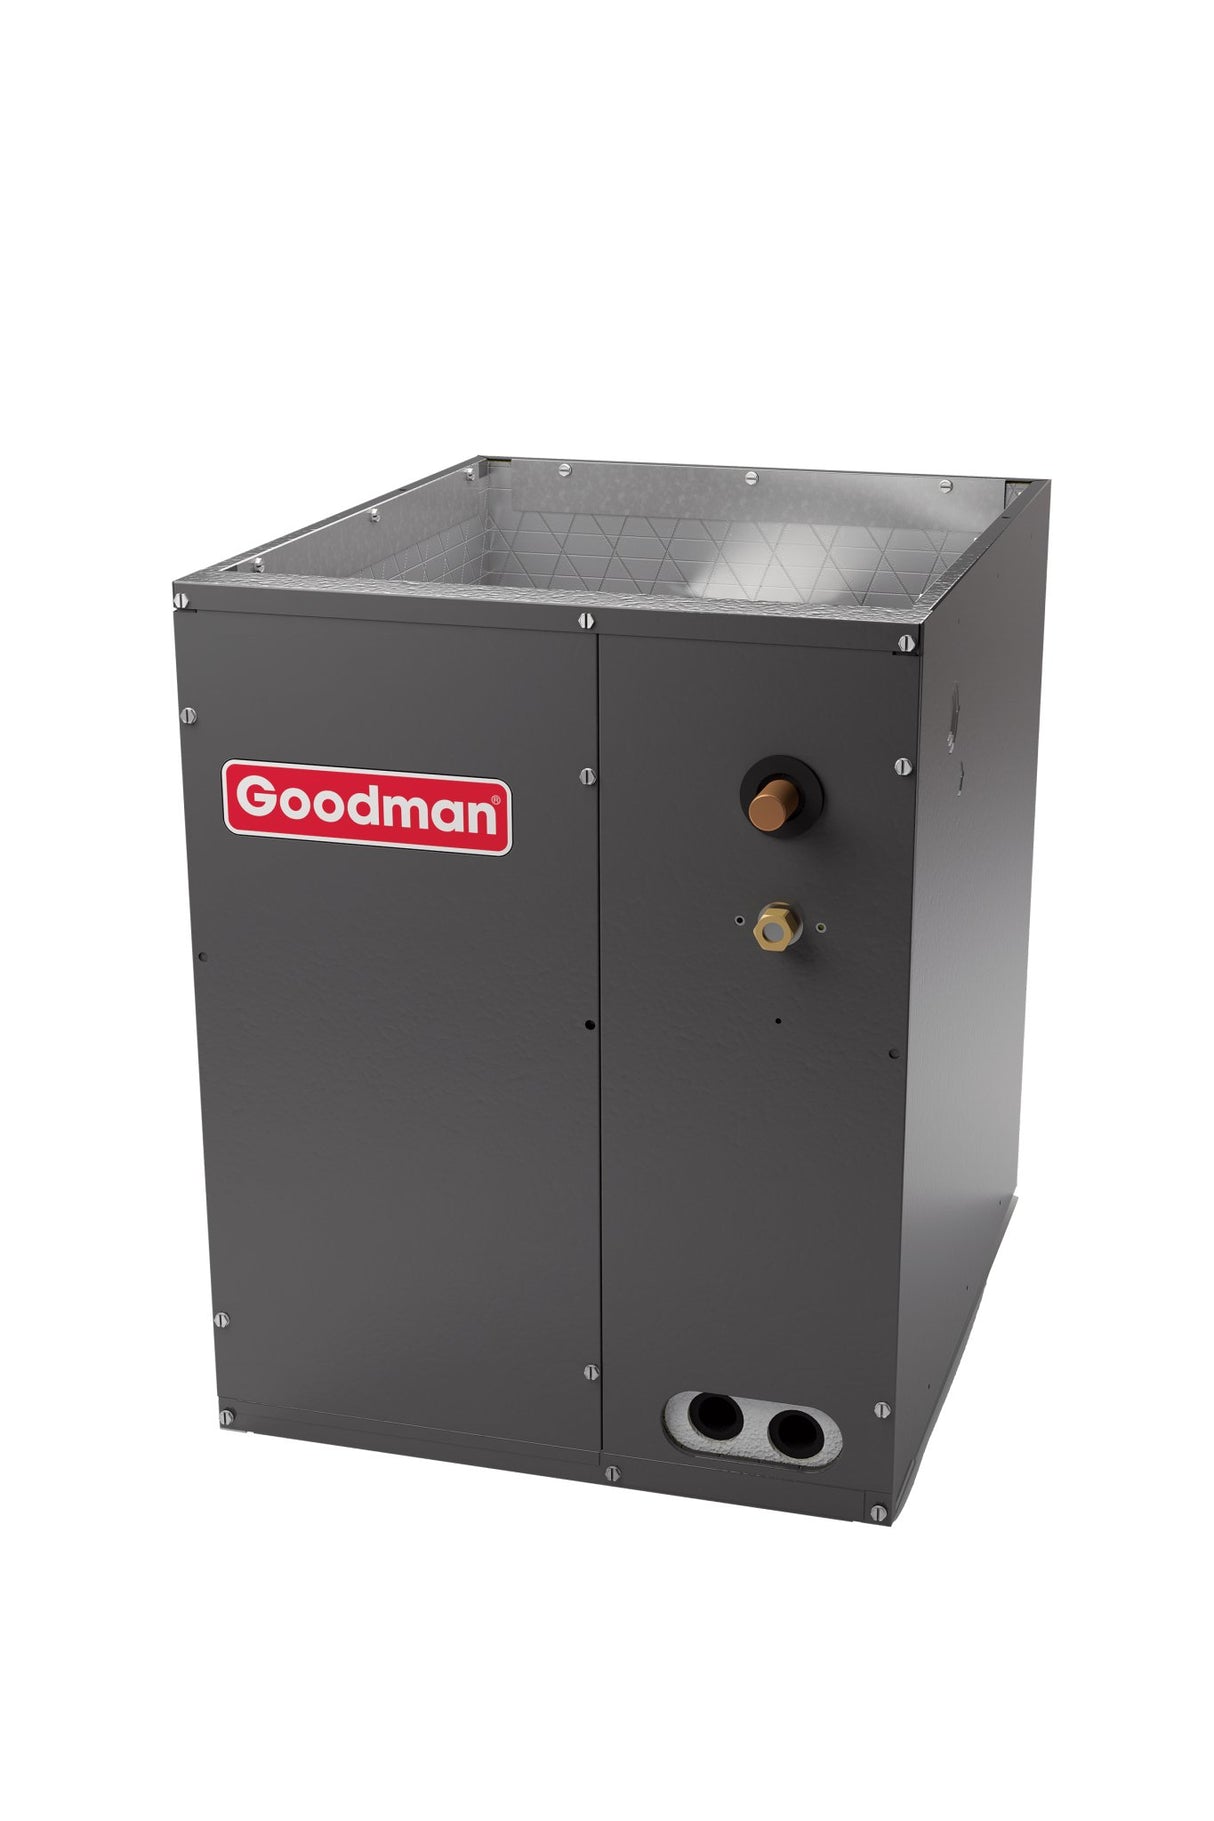 Goodman 1.5 Ton 14.5 SEER 80% 60,000 BTU Gas Furnace and Air Conditioner System Upflow GM9S800603AN CAPTA1818A4 GSXN401810 - AC units for less